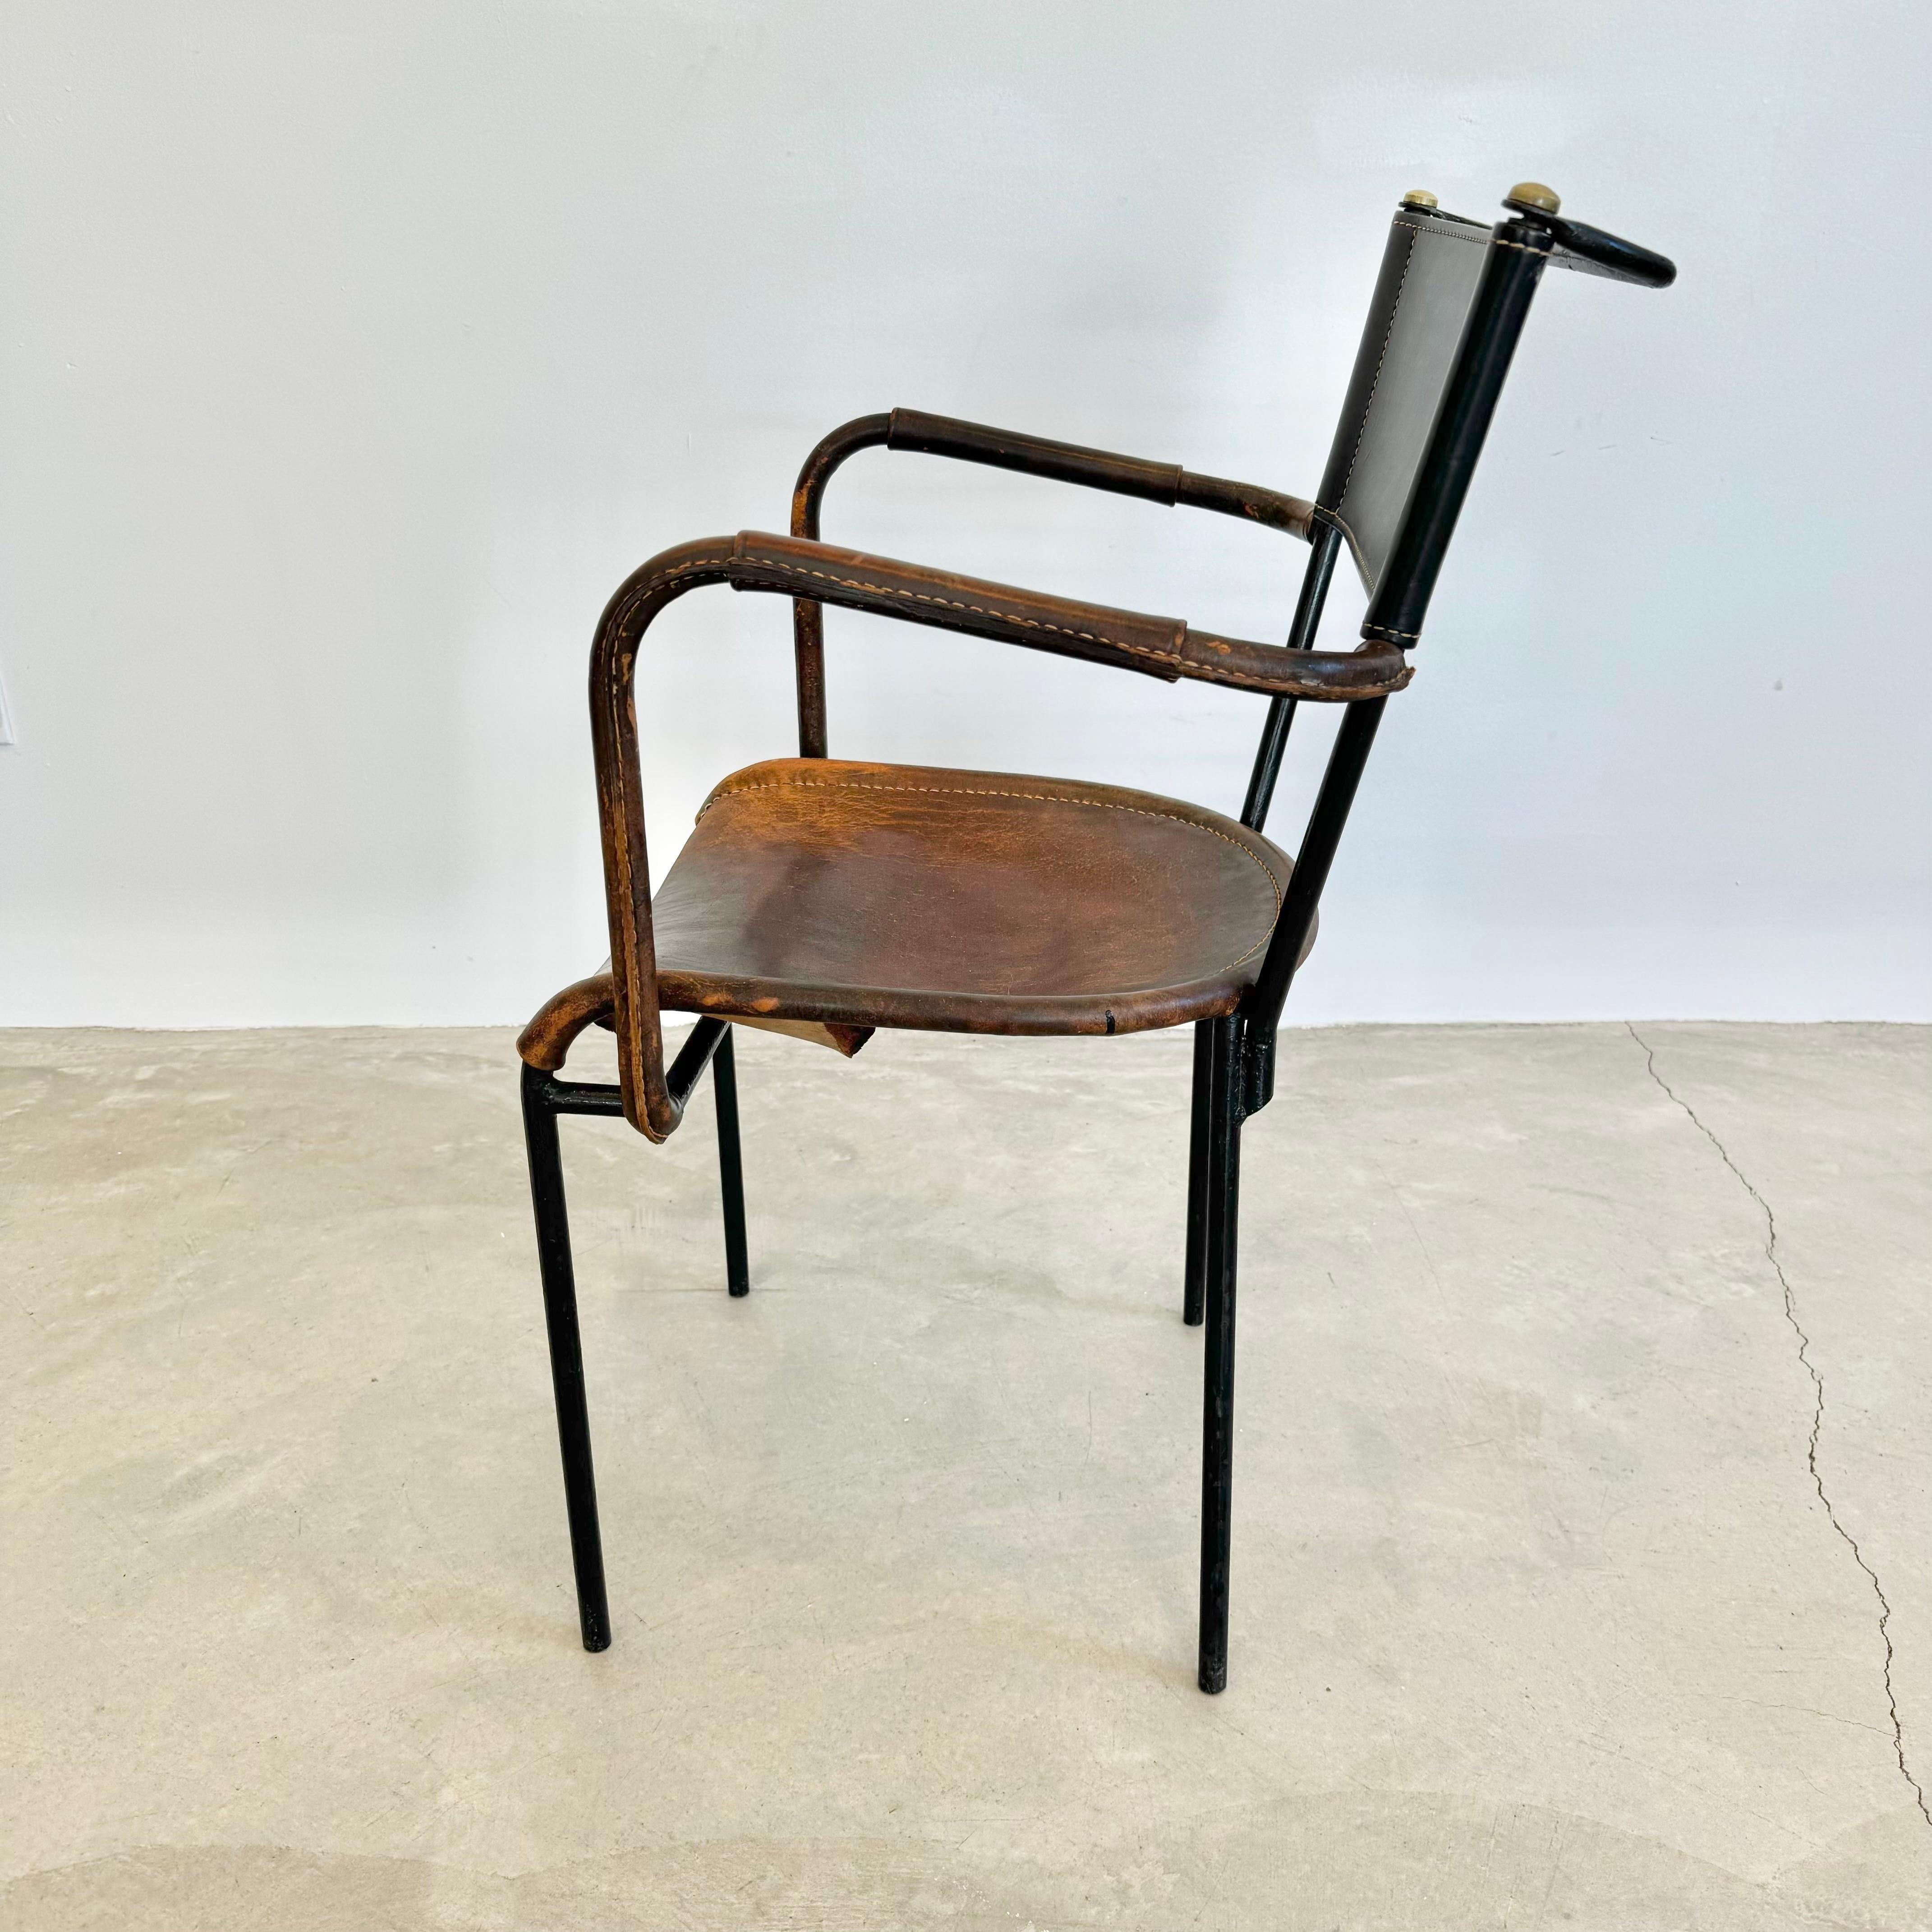 Jacques Adnet Sculptural Leather Armchair, 1950s France For Sale 7